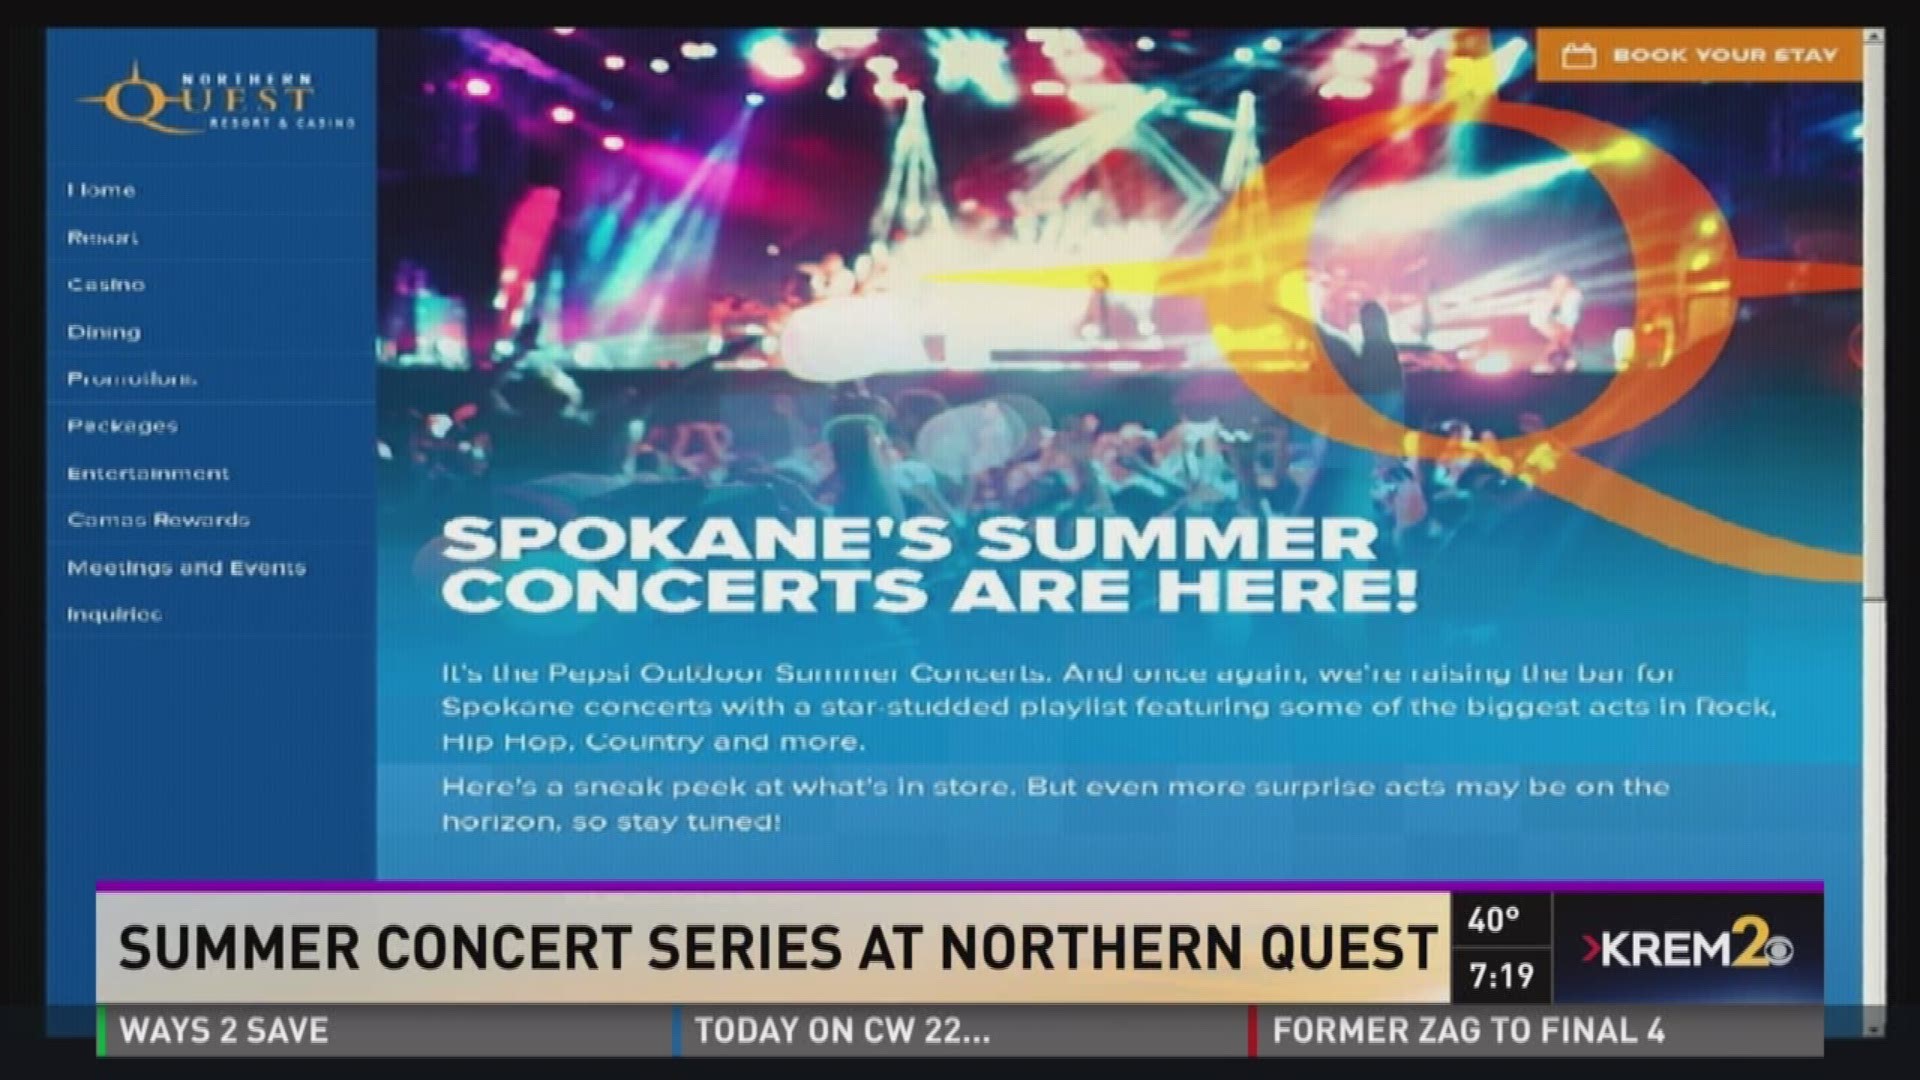 Summer Concert Series at Northern Quest